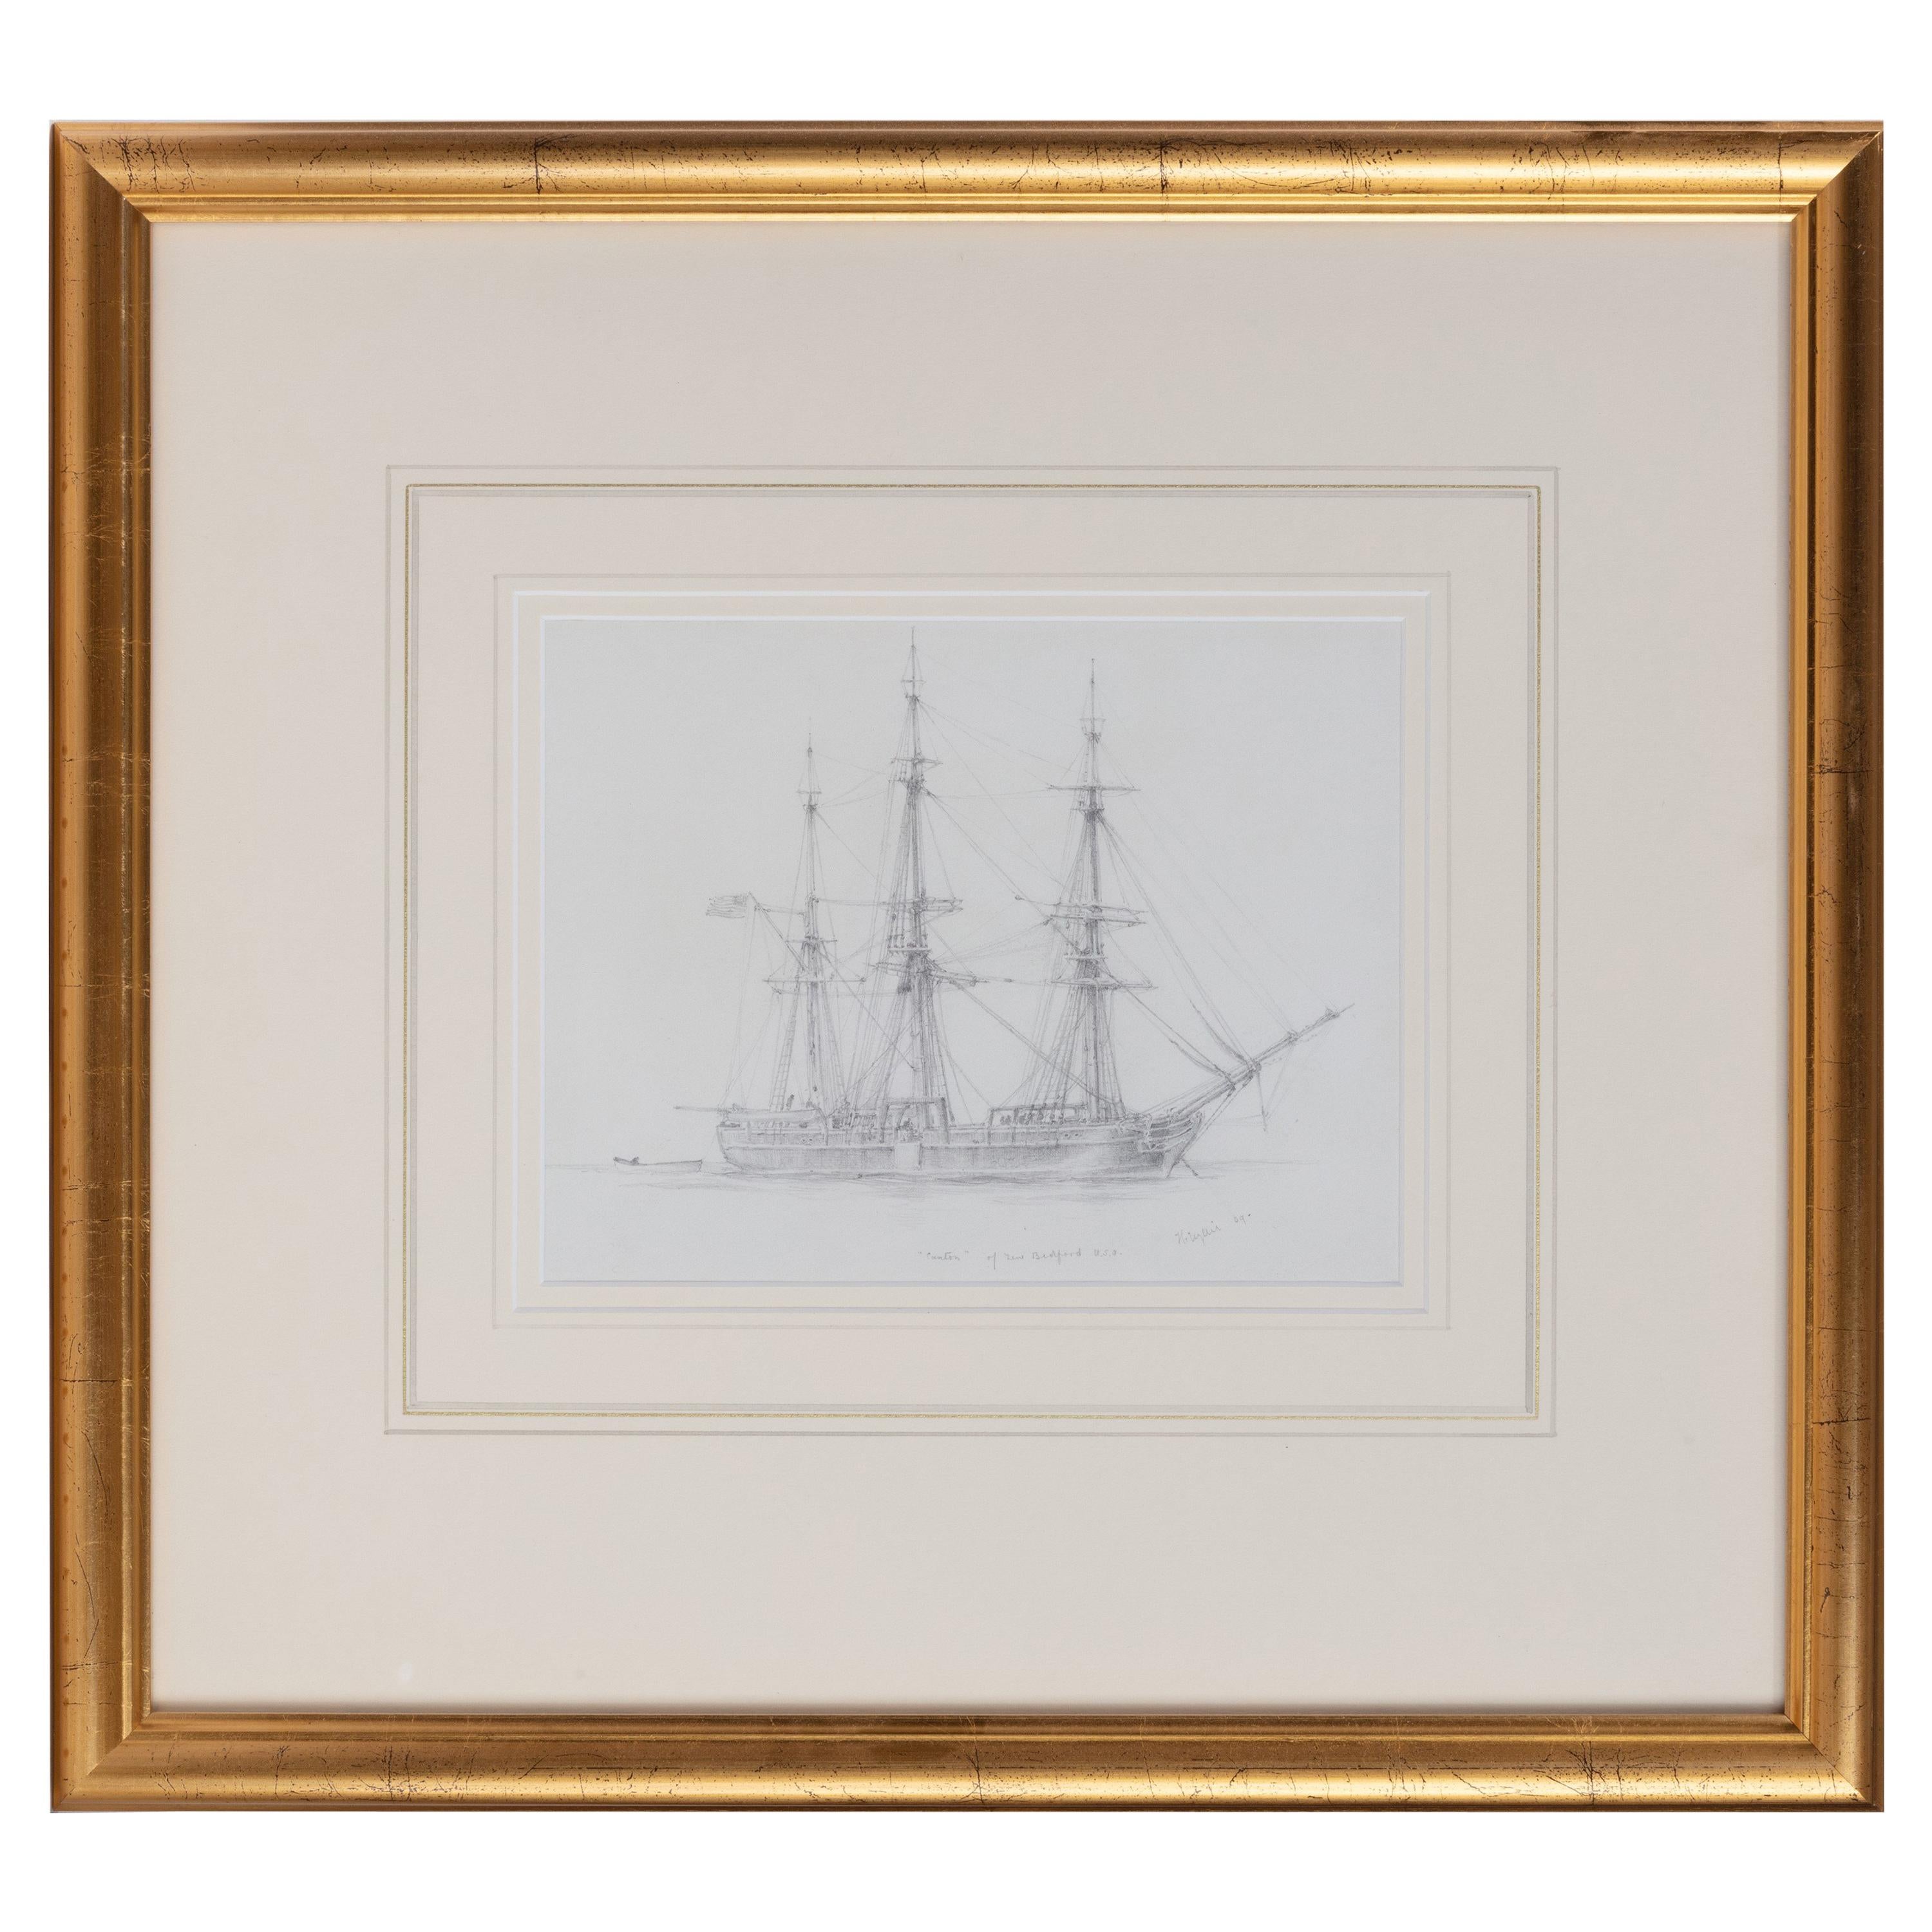 An Unusual Pencil Drawing of “Canton”, a Three-Masted Whaling Ship-at This Point